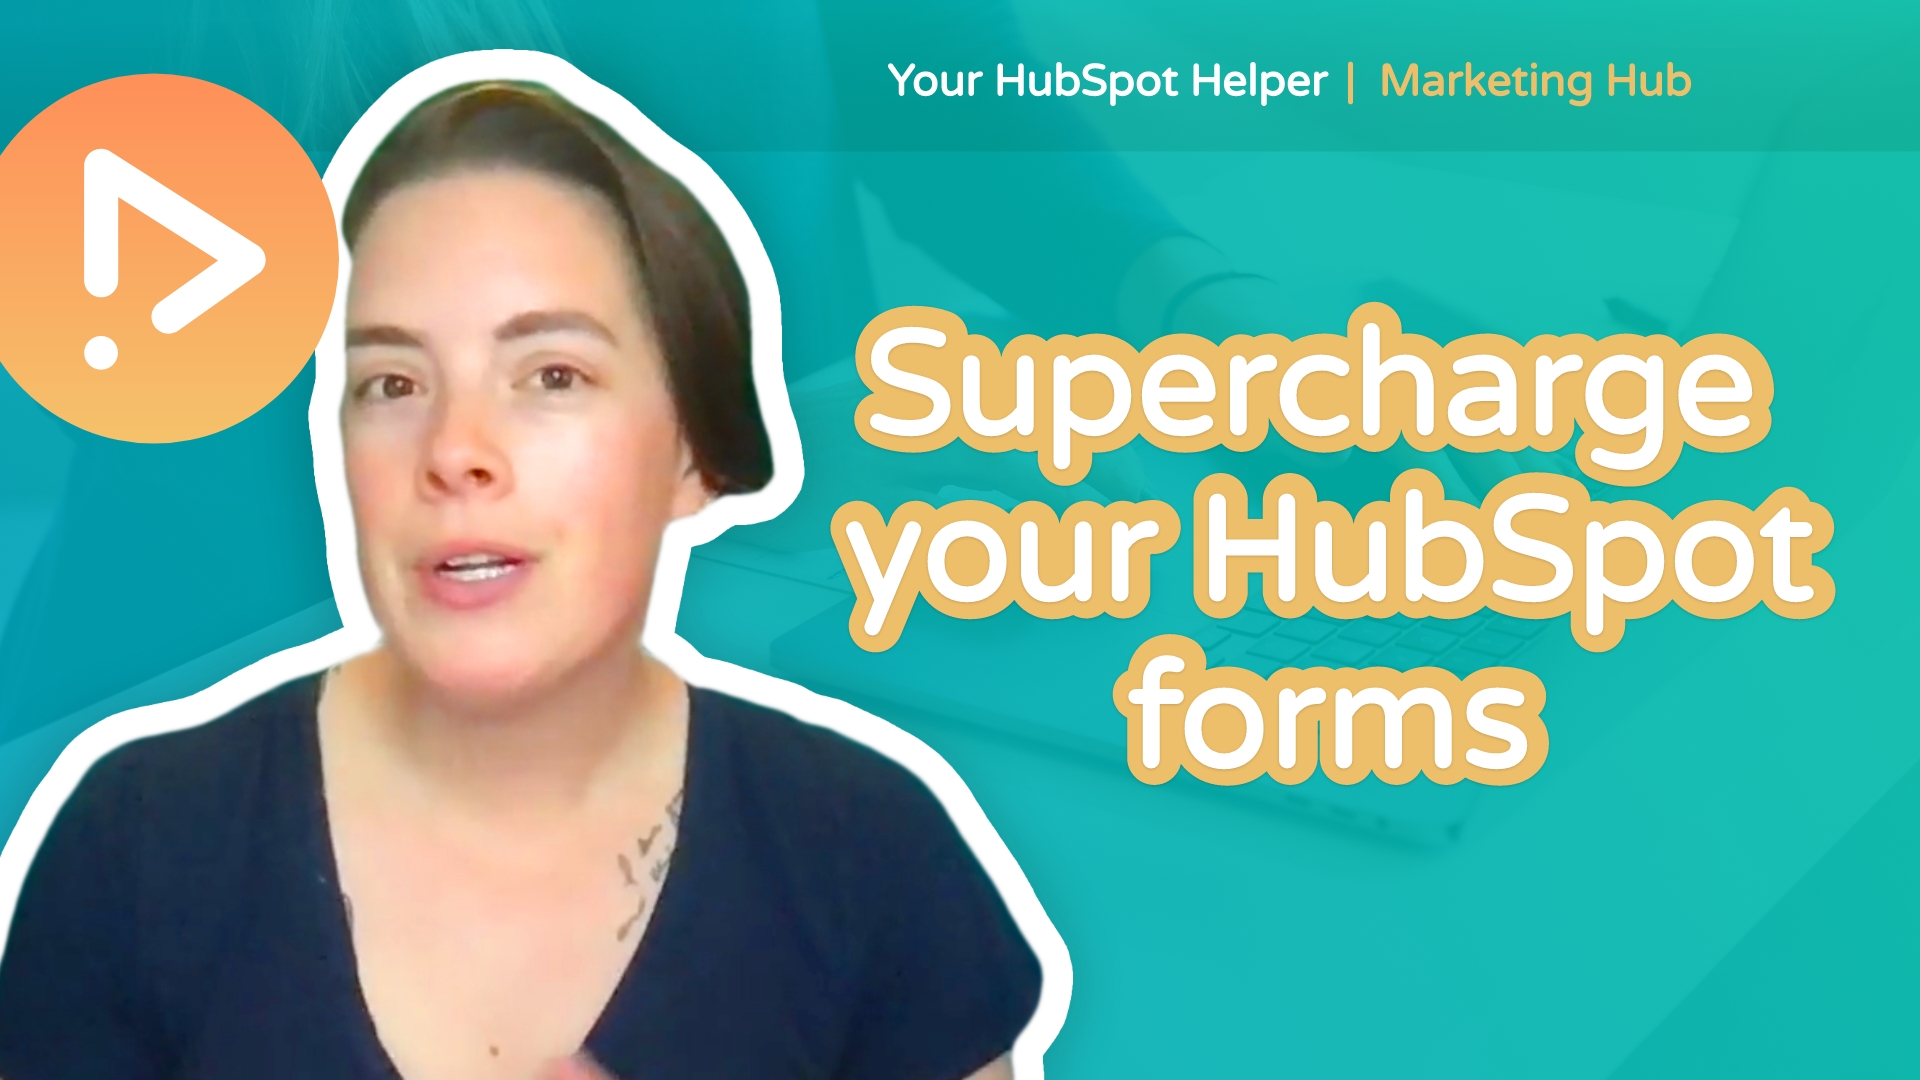 How to supercharge your HubSpot forms